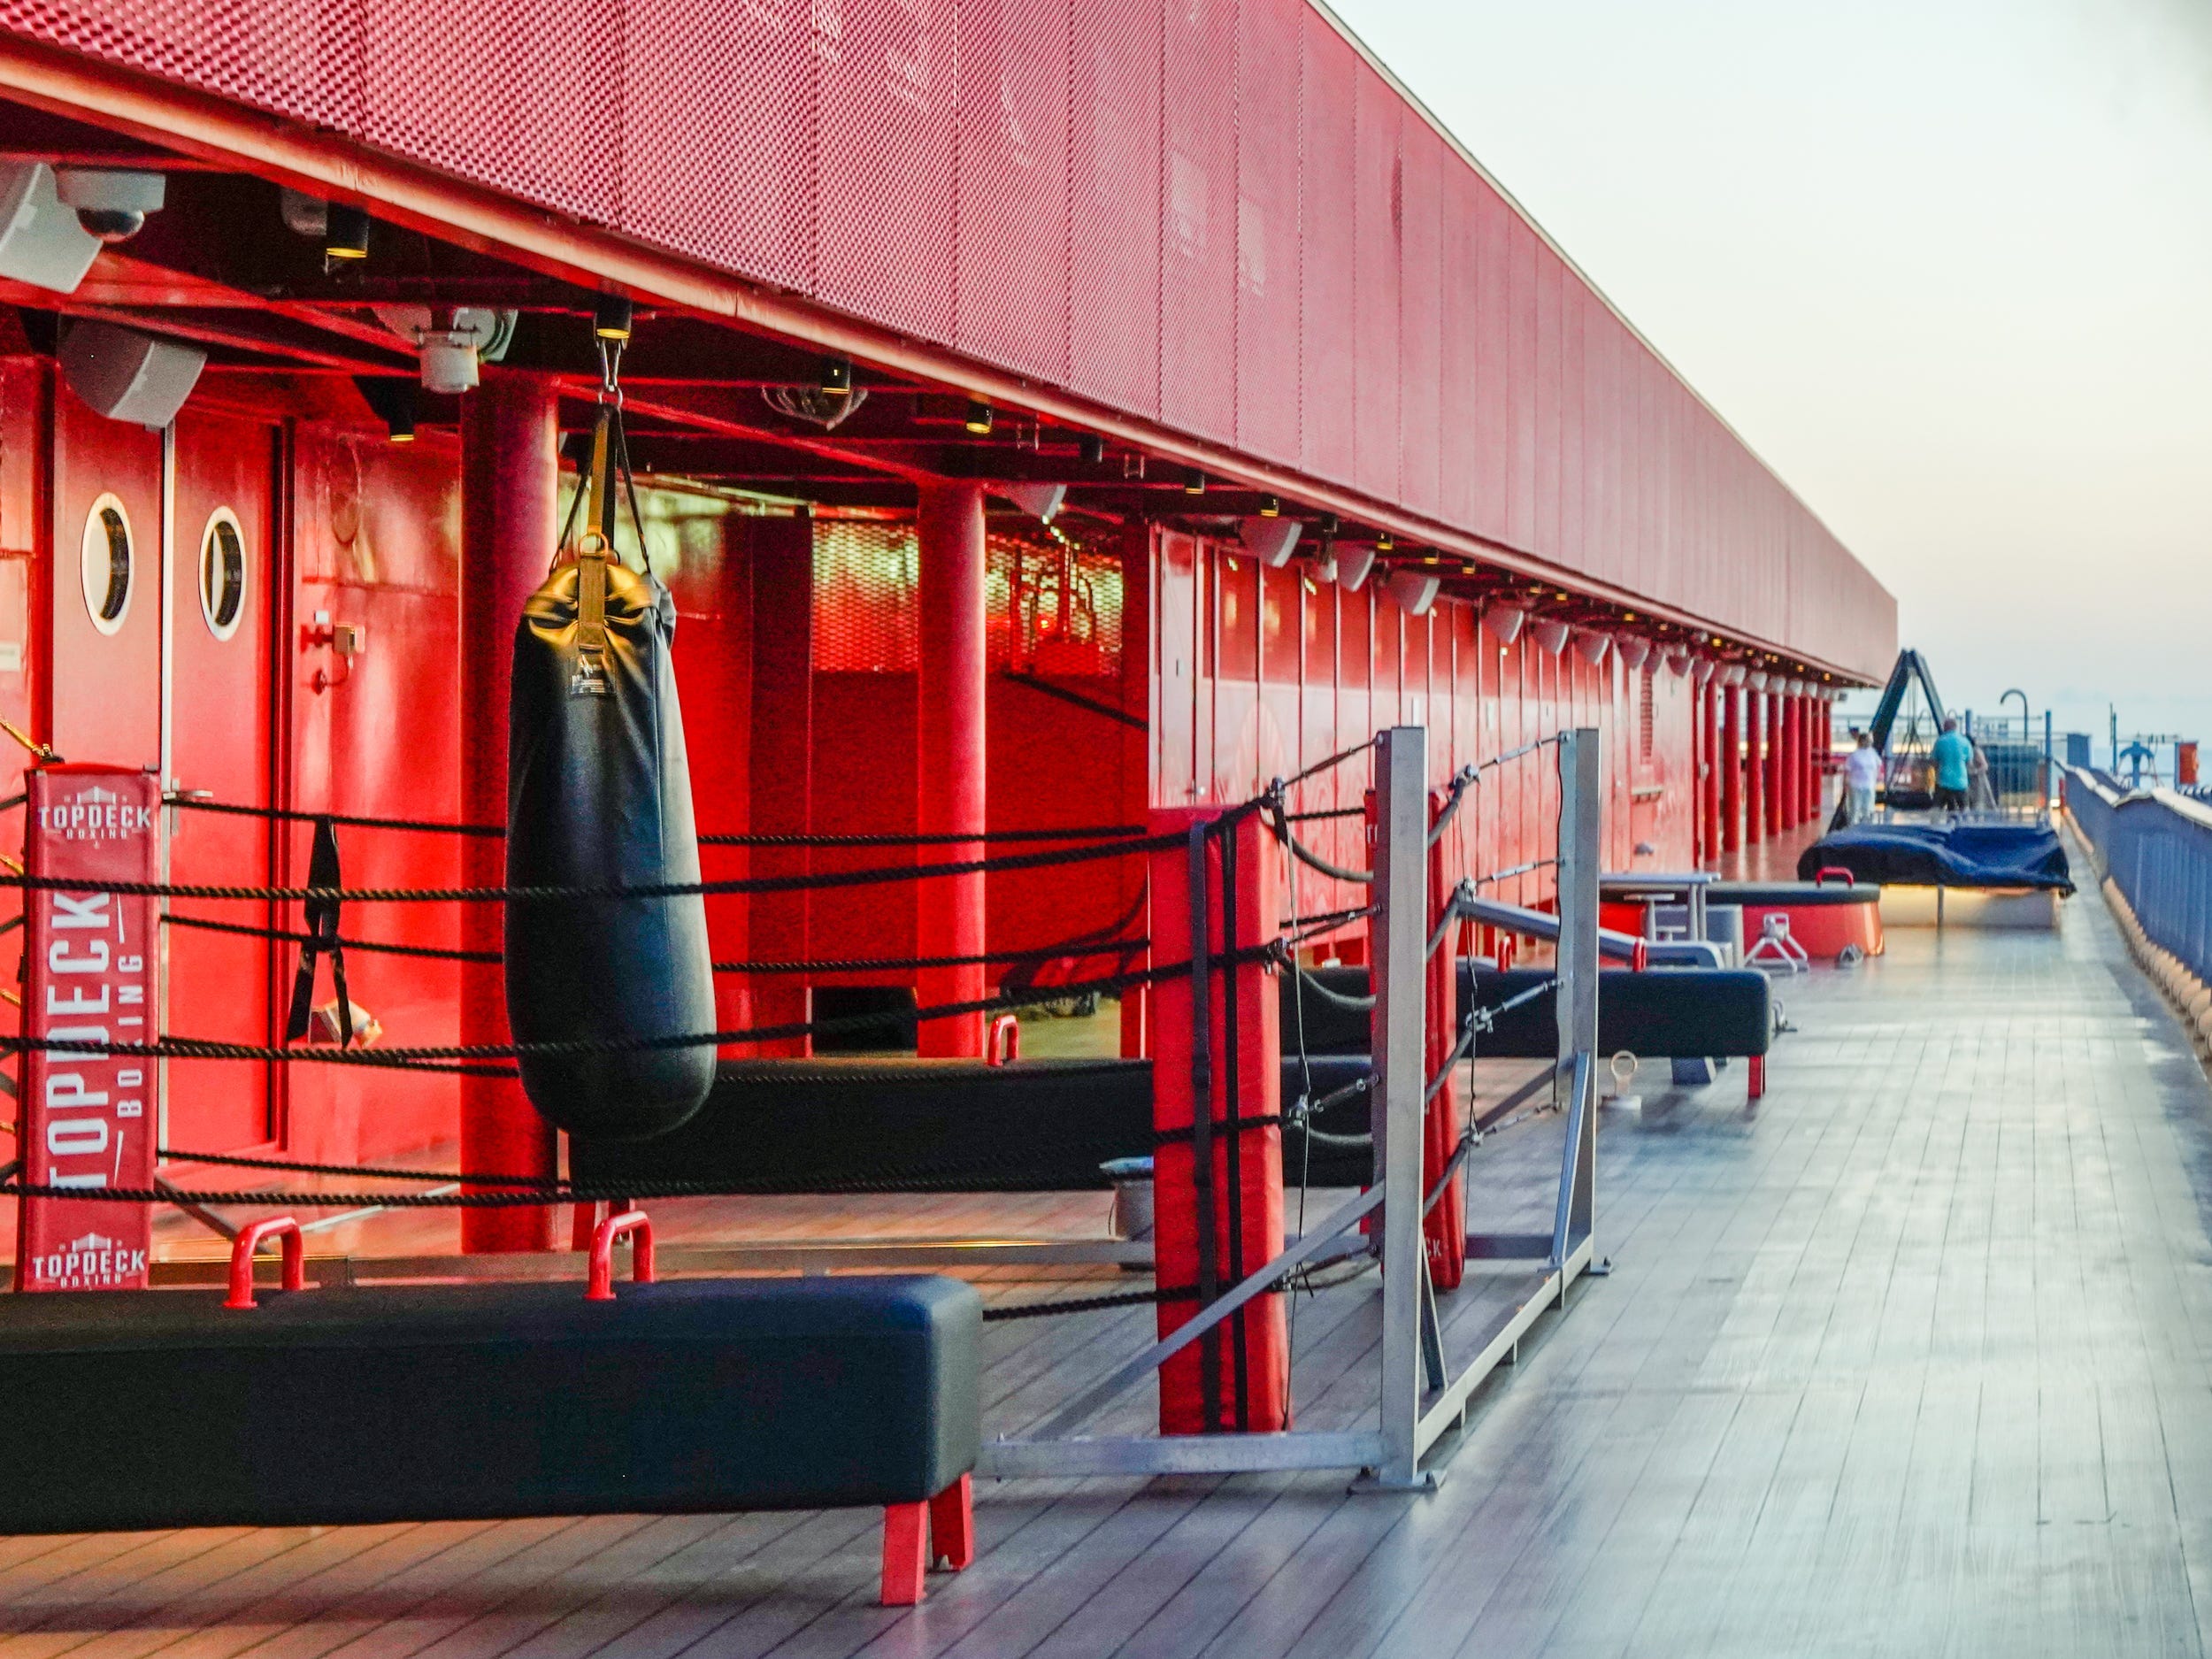 <p>On deck 16, the Athletic Club is home to an outdoor training center with strength and gymnastics equipment as well as a boxing ring. </p>